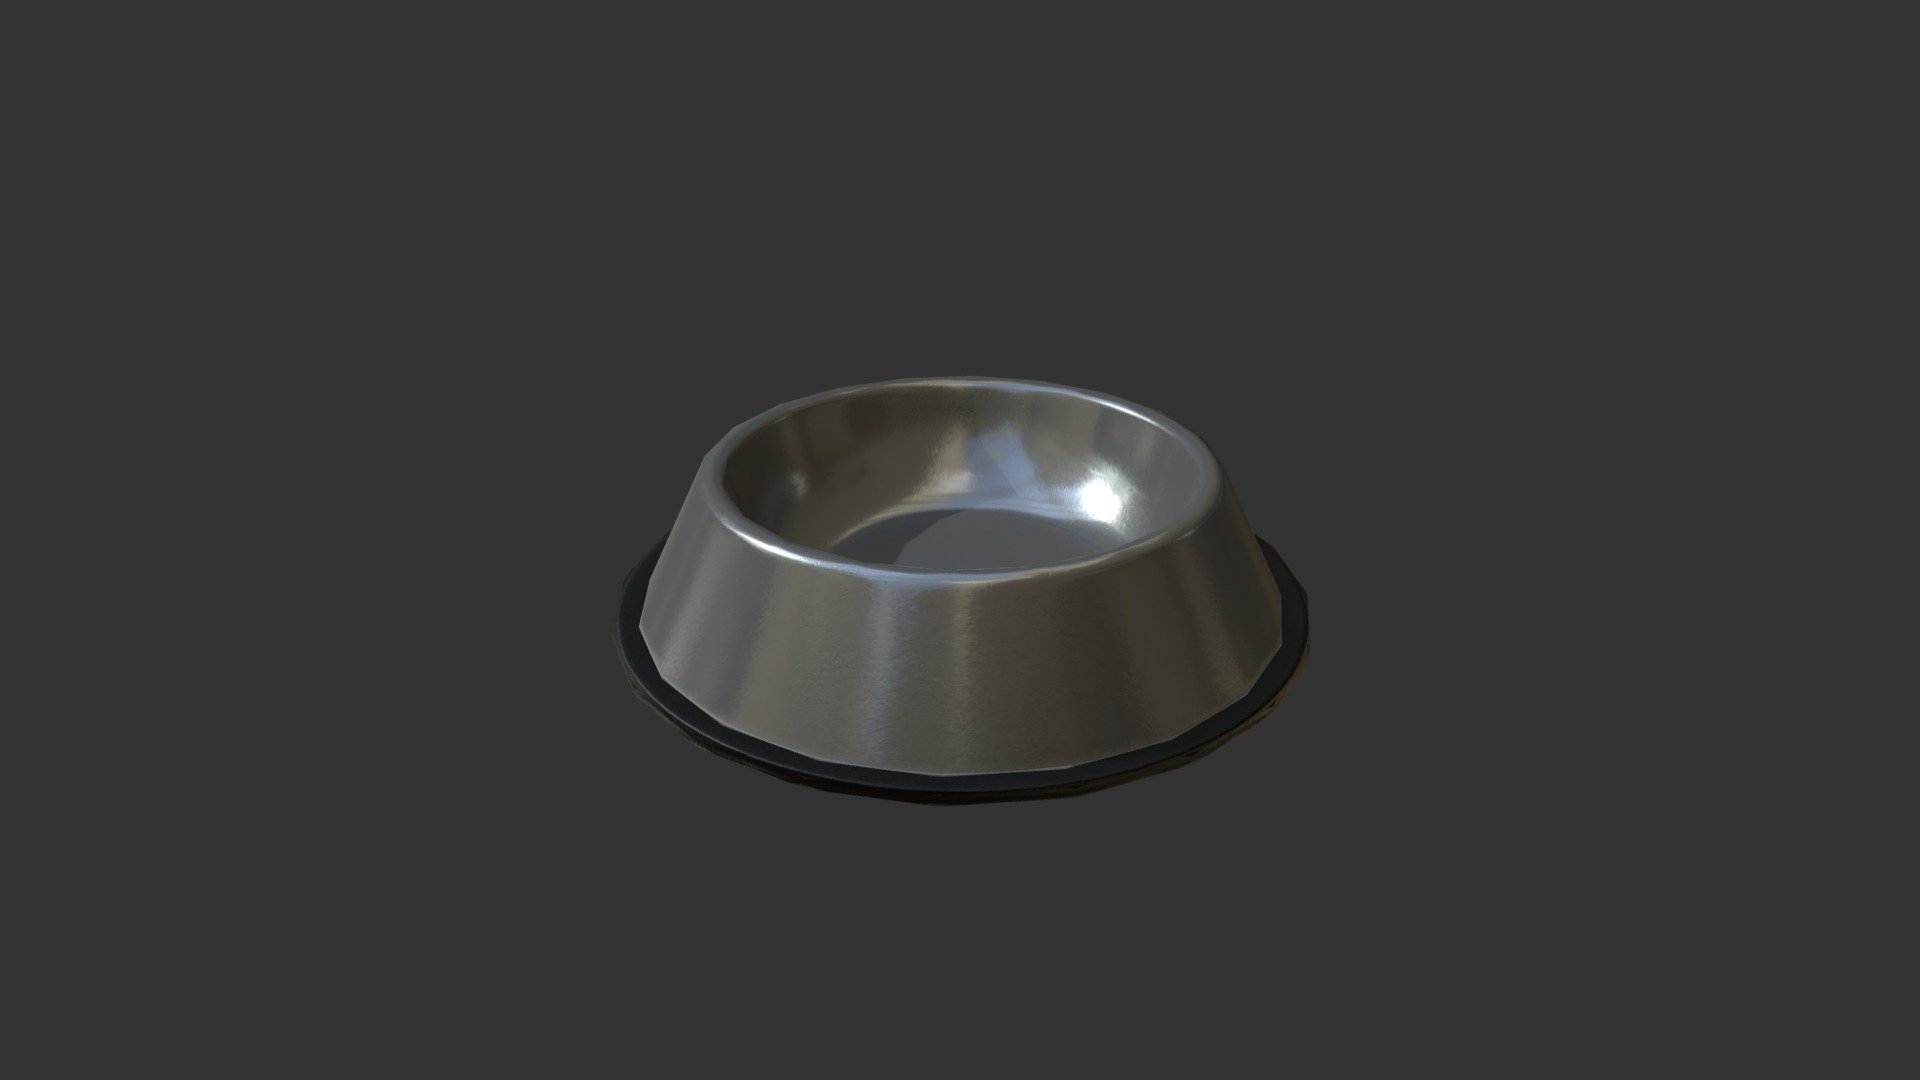 This is a Pet Food Bowl. A high quality, low-poly 3d model ready for Virtual Reality (VR), Augmented Reality (AR), games and other real-time apps.

Textures are created using Substance Painter.

Following textures are provided with texture size 2048x2048px: Albedo / BaseColor Metalic Roughness Ambient Occlusion *Normal Map

Polycounts: Tris: 420 Verts: 221

Renders are made using Marmoset Toolbag 3. Thank you 3d model